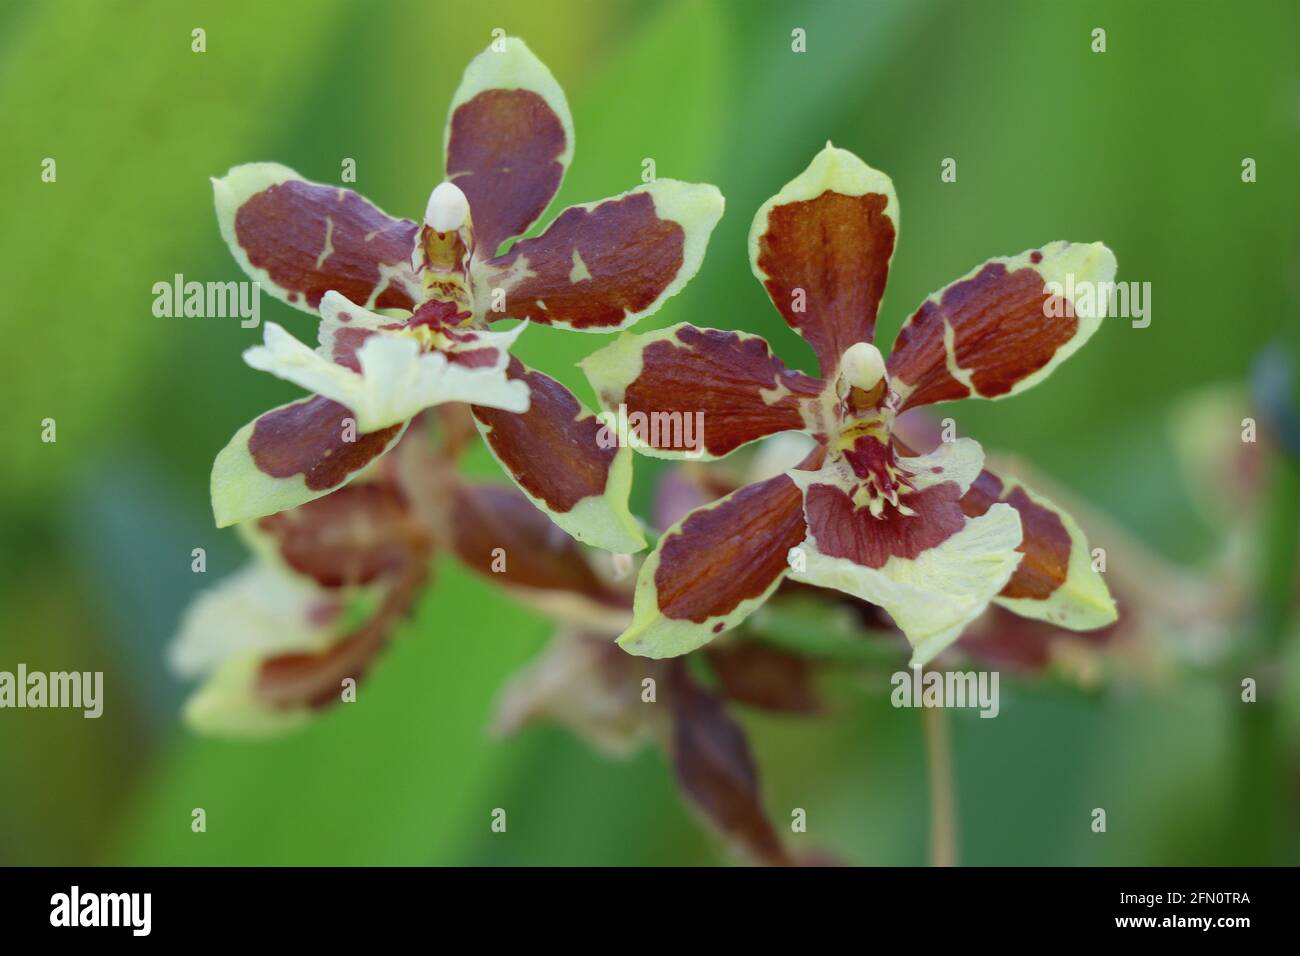 Blooming flower Oncidium altissimum Orchids. Wydler's dancing-lady orchid Stock Photo